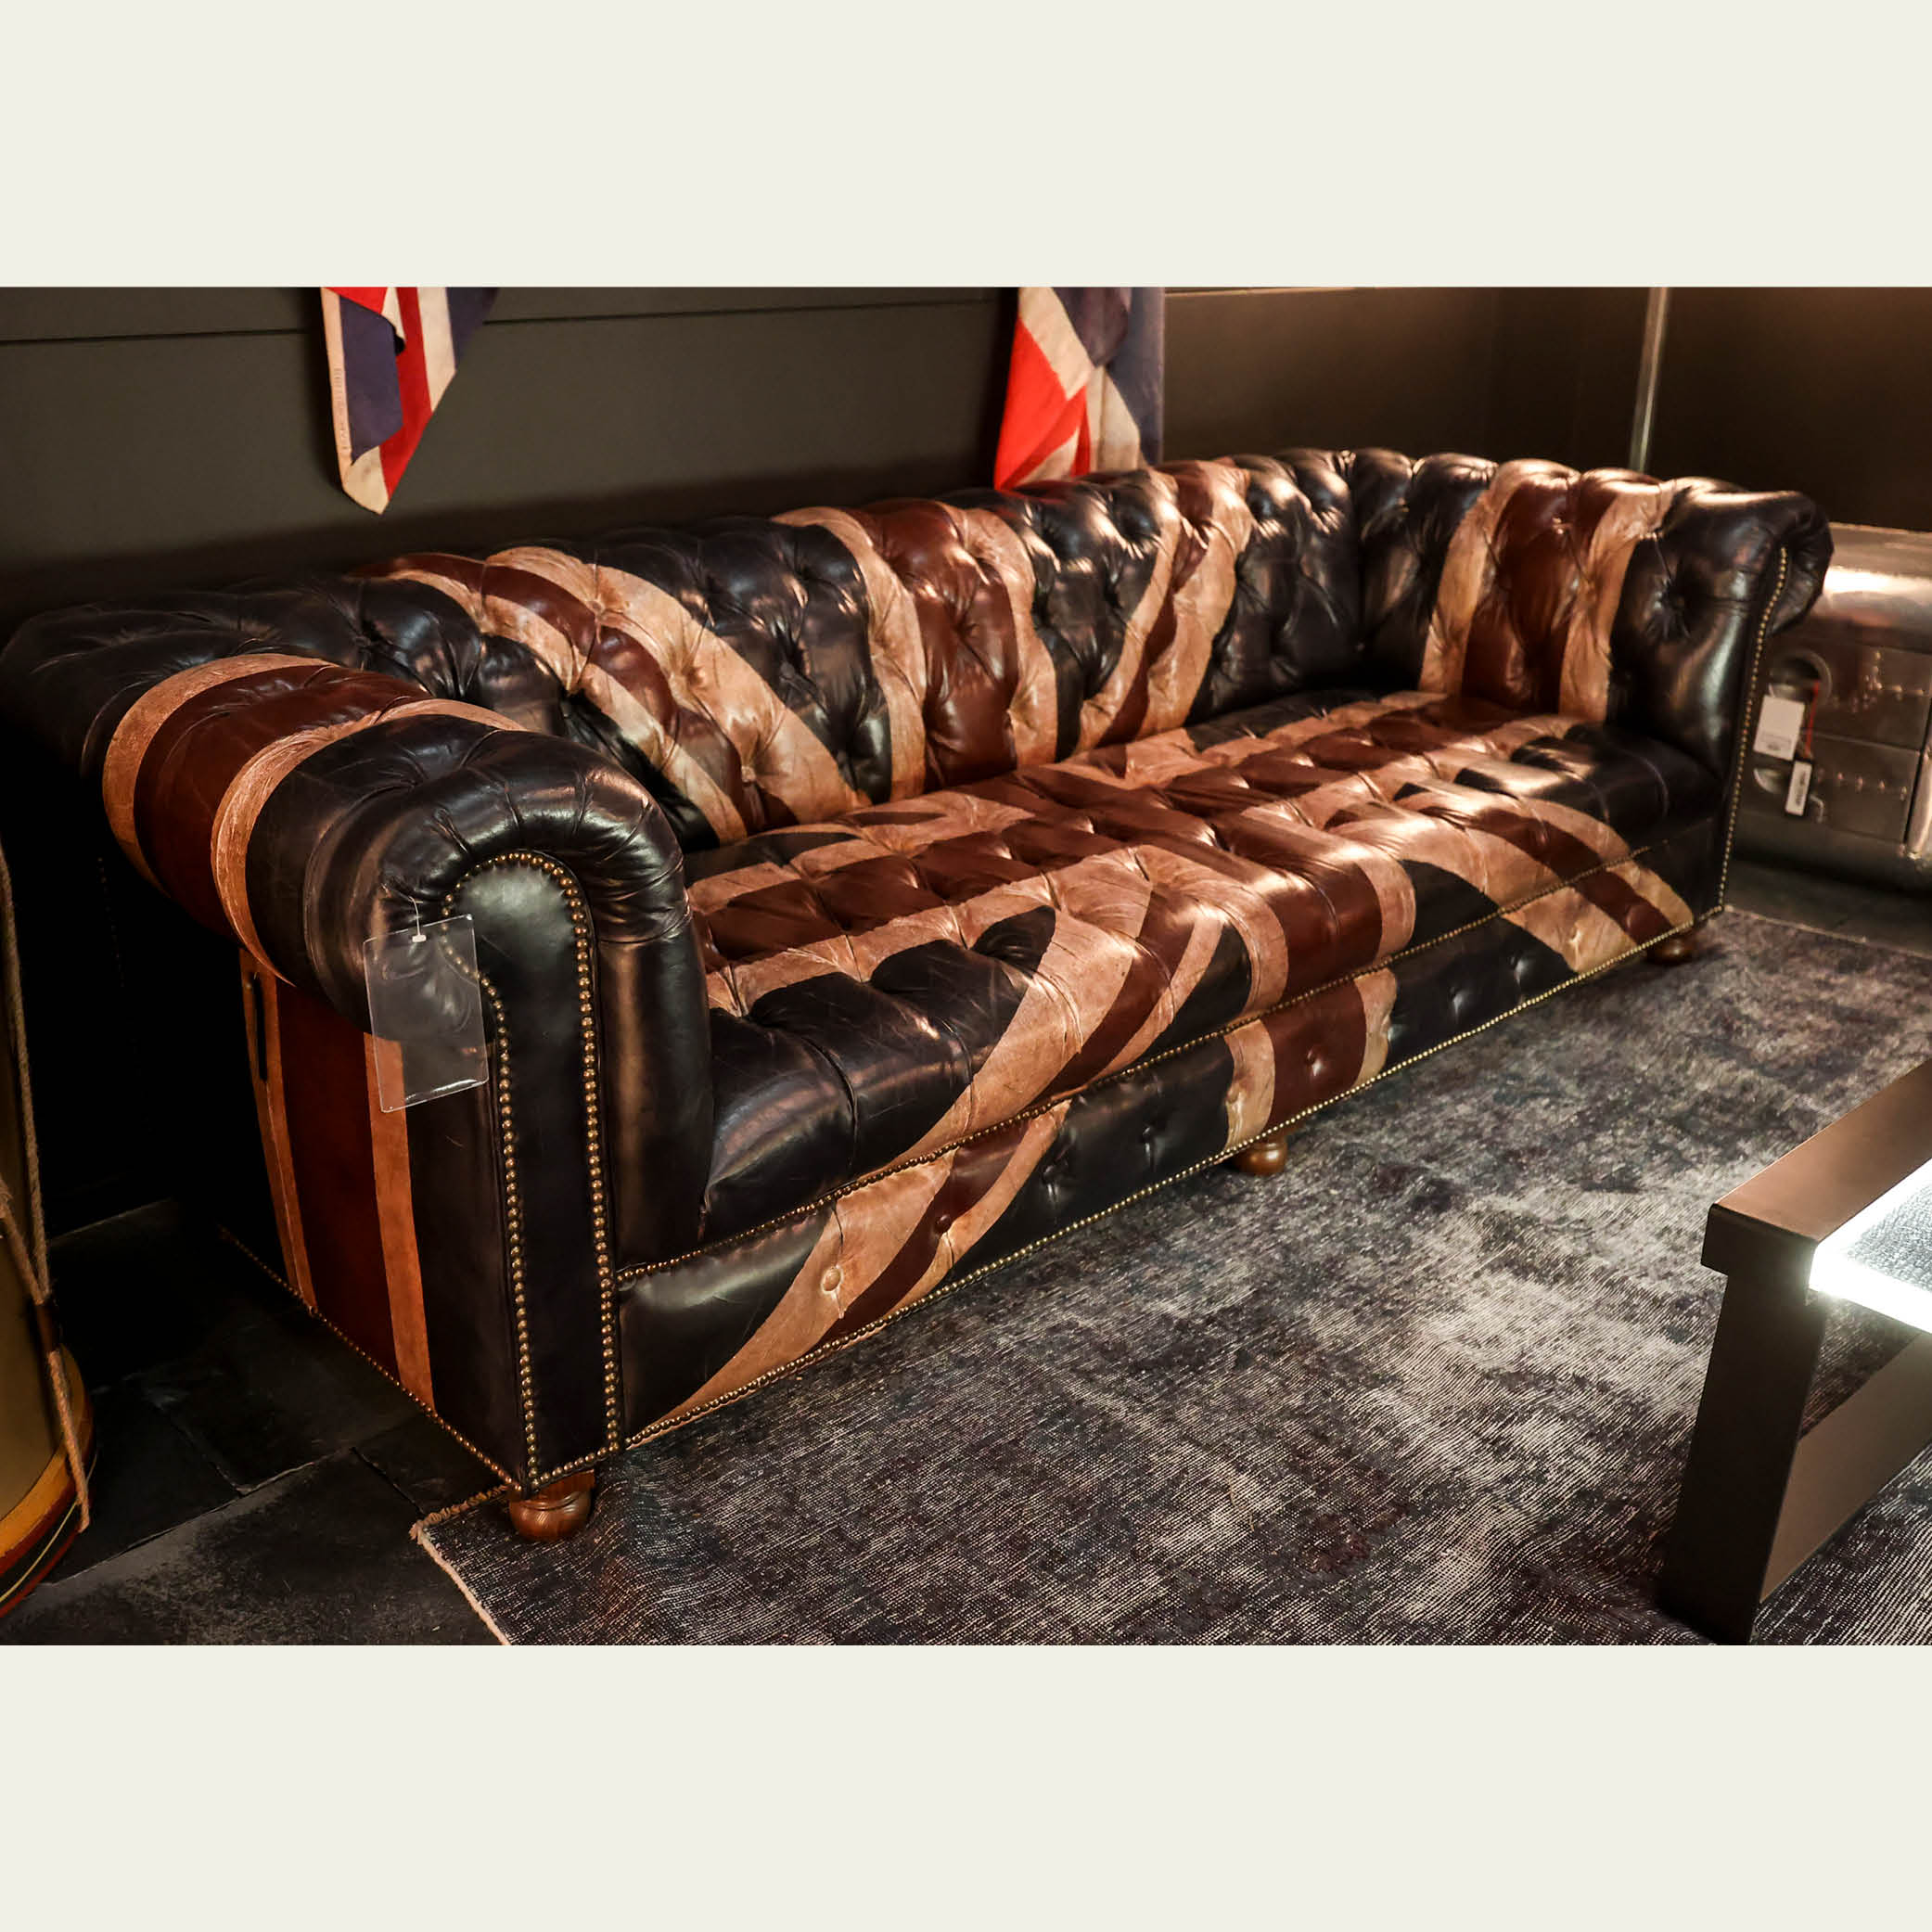 EXPO Timothy Oulton WESTMINSTER BUTTON 3-seater sofa